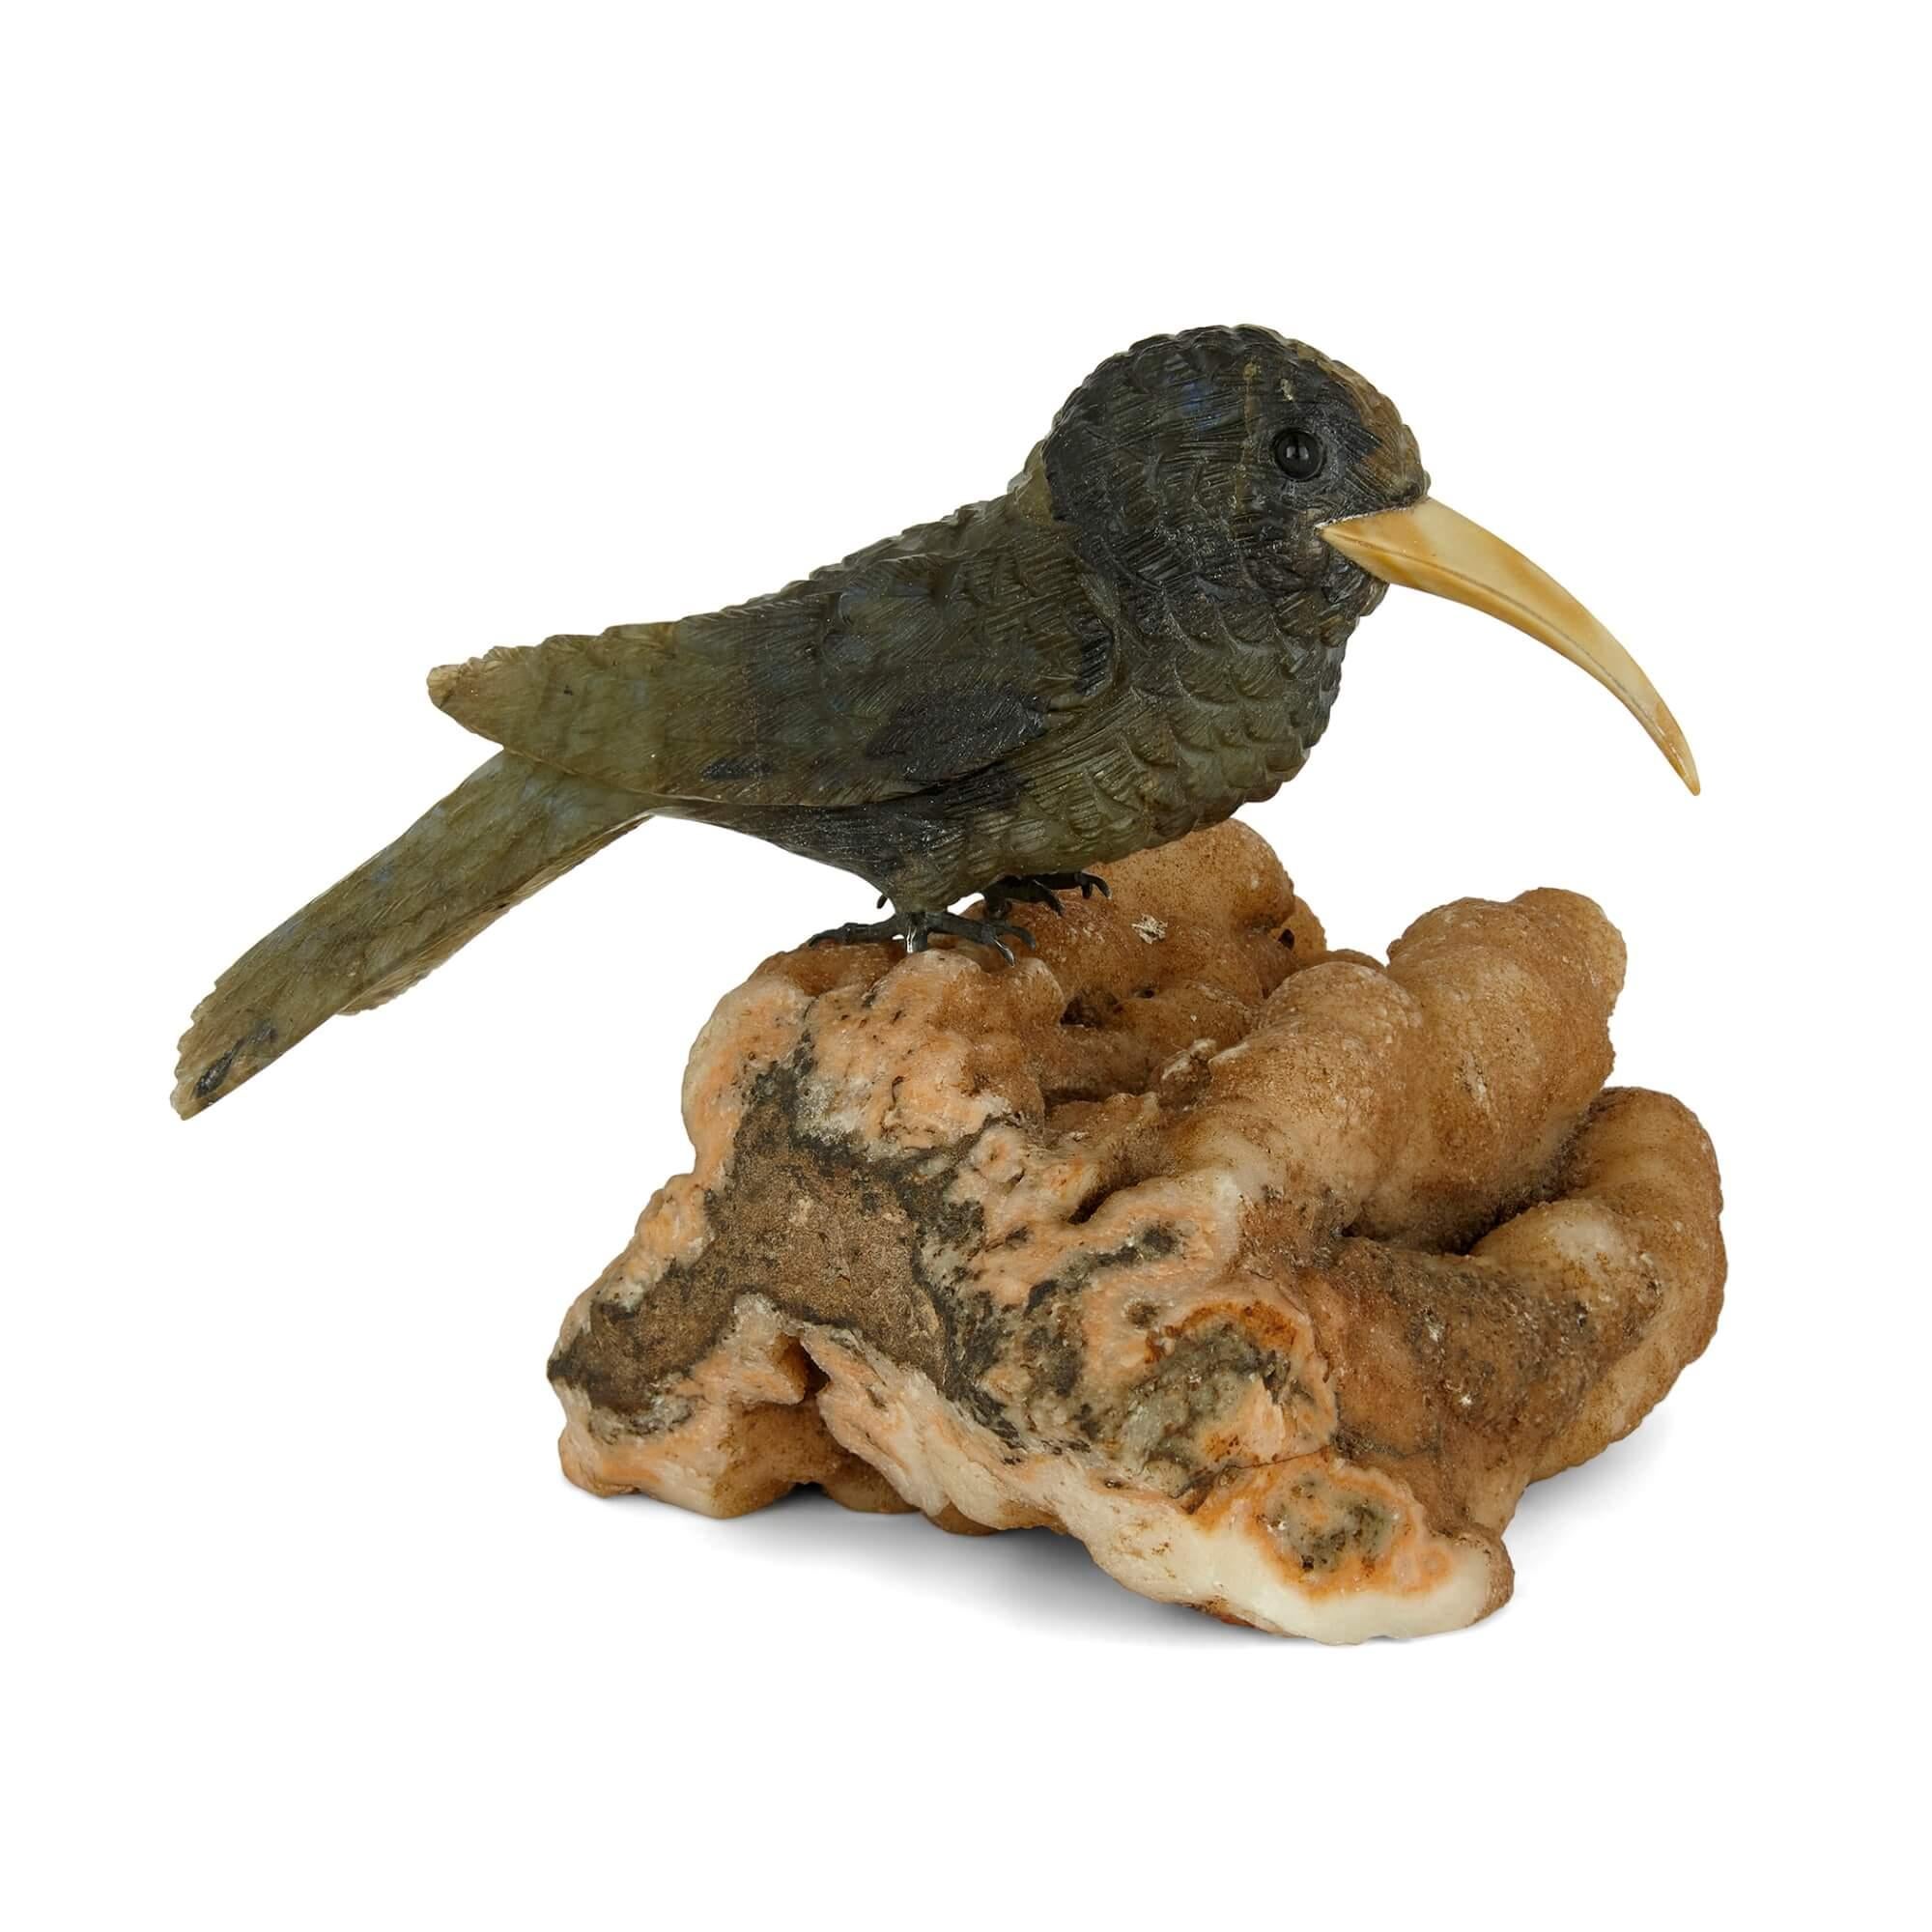 Labradorite and silver bird model 
Continental, 20th Century 
Height 10cm, width 11cm, depth 12cm

Crafted in the 20th century the stone model depicts a hummingbird perched on top of an unusual rock. 

The bird is carved from labradorite, an